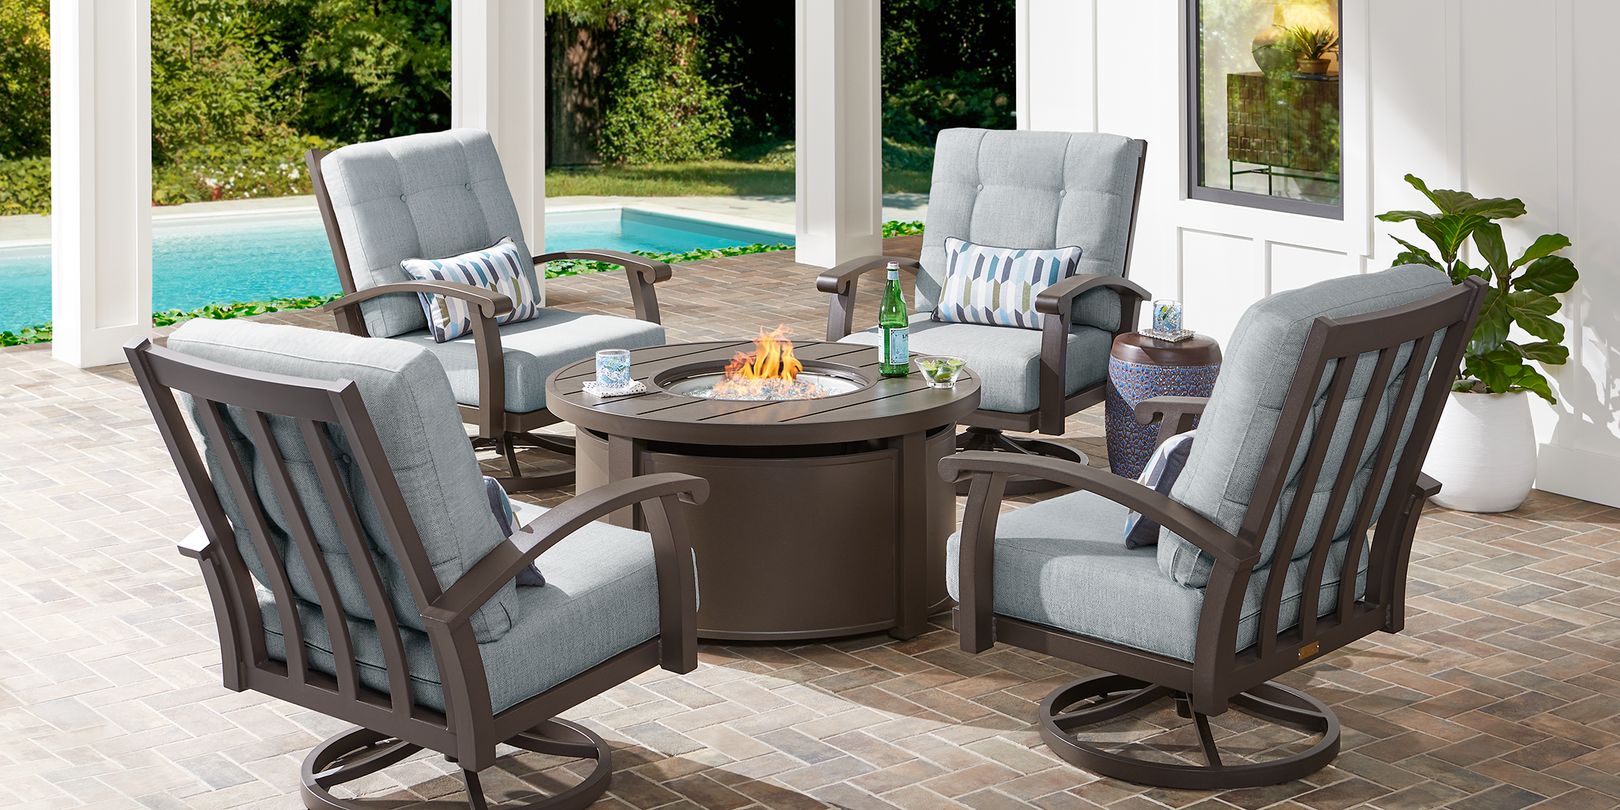 Fire pit with chairs